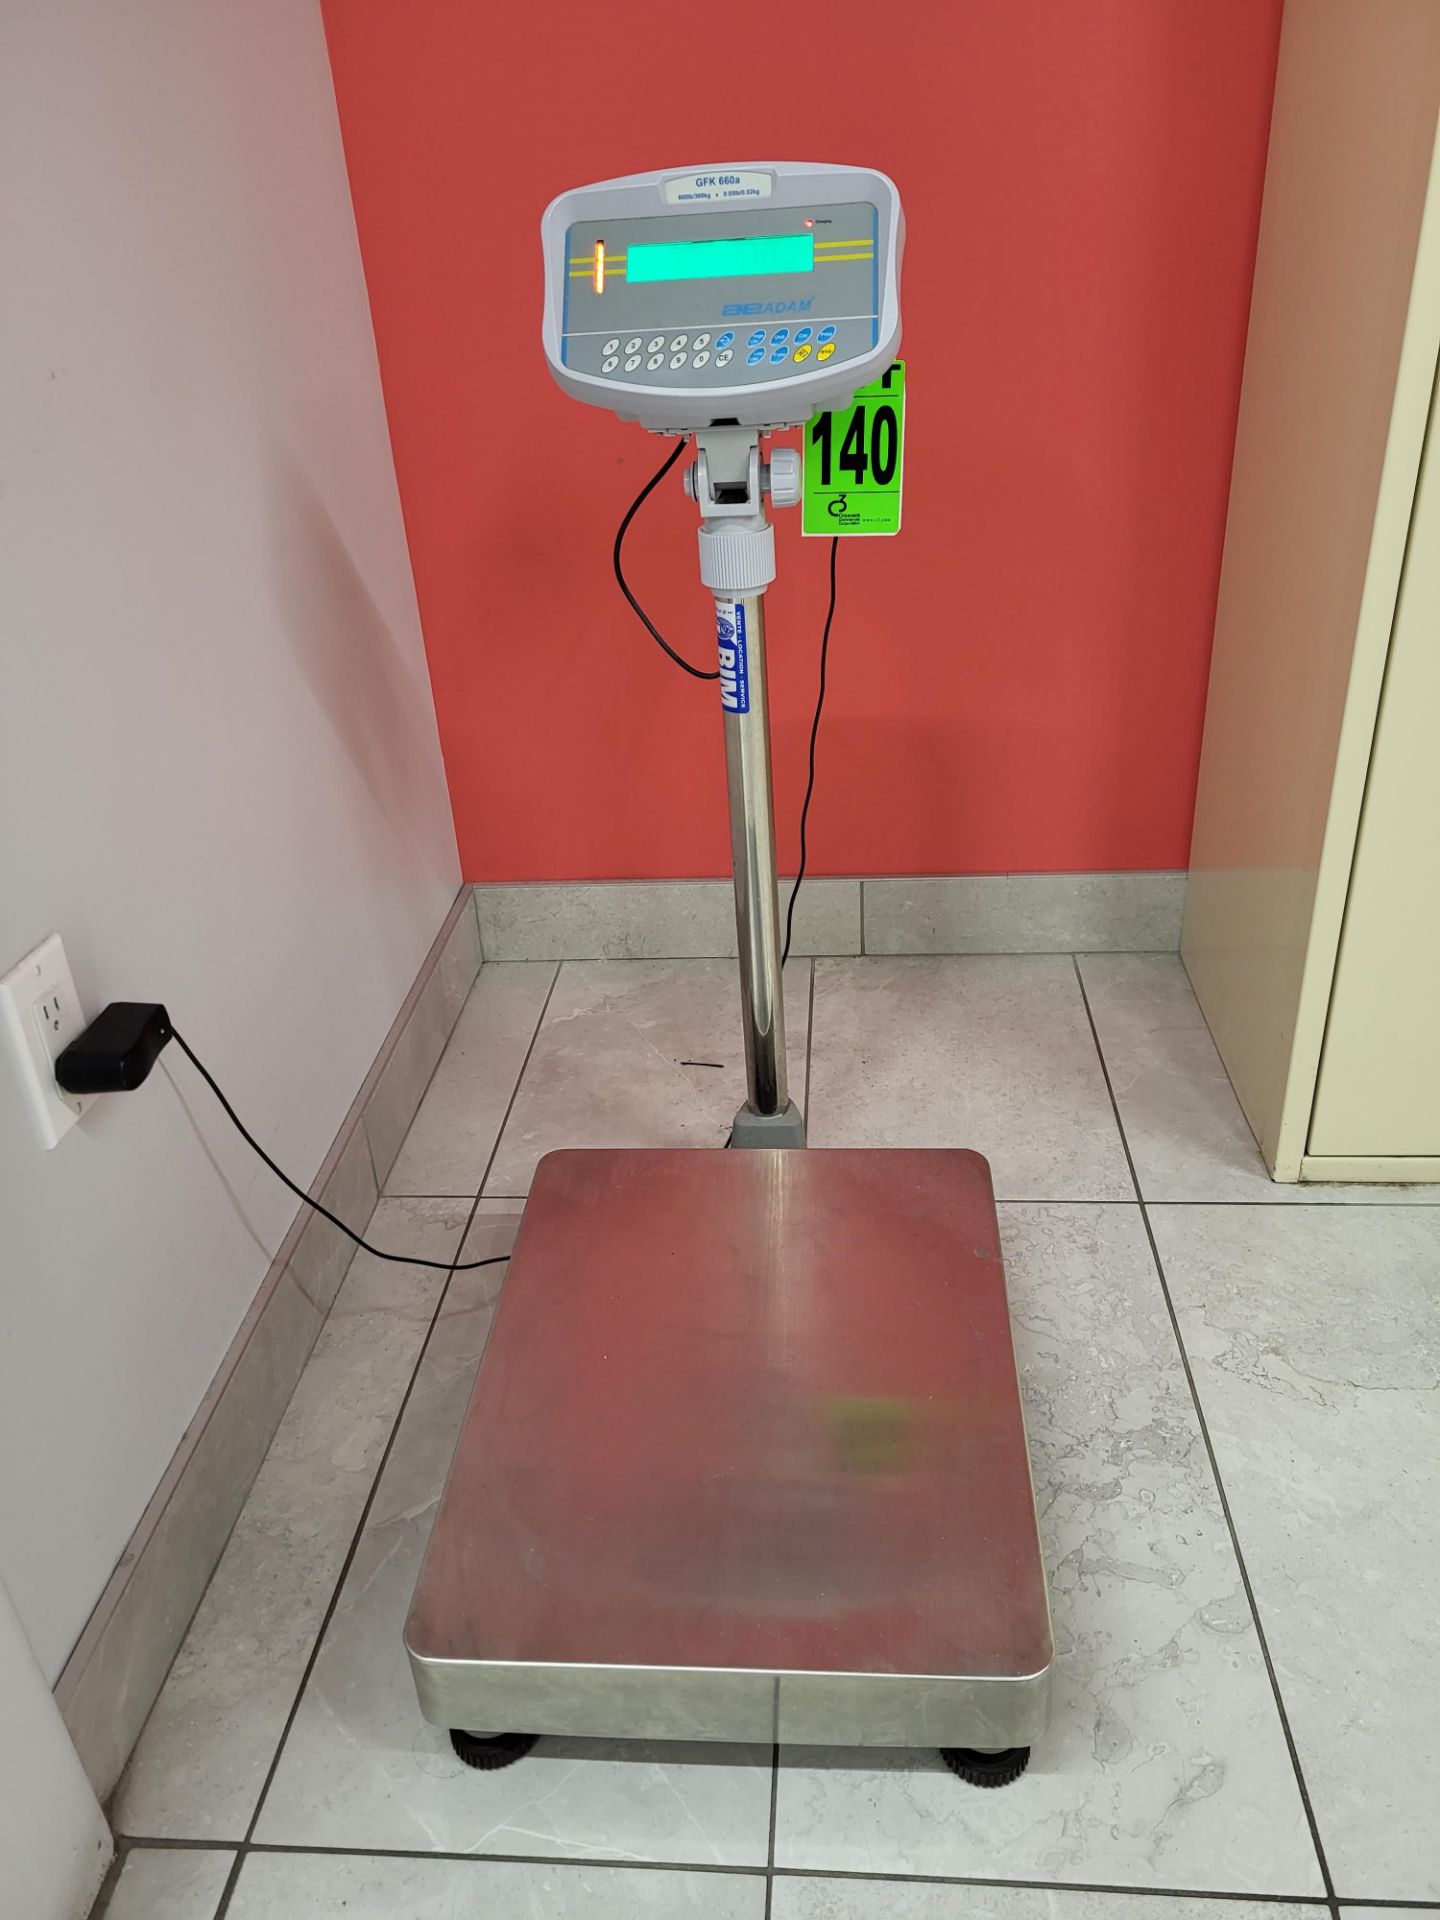 ADAM mod. GFK-660a Floor Checkweighing Scale, 660 lb / 300kg x 0.05lb/0.02kg - Image 3 of 6